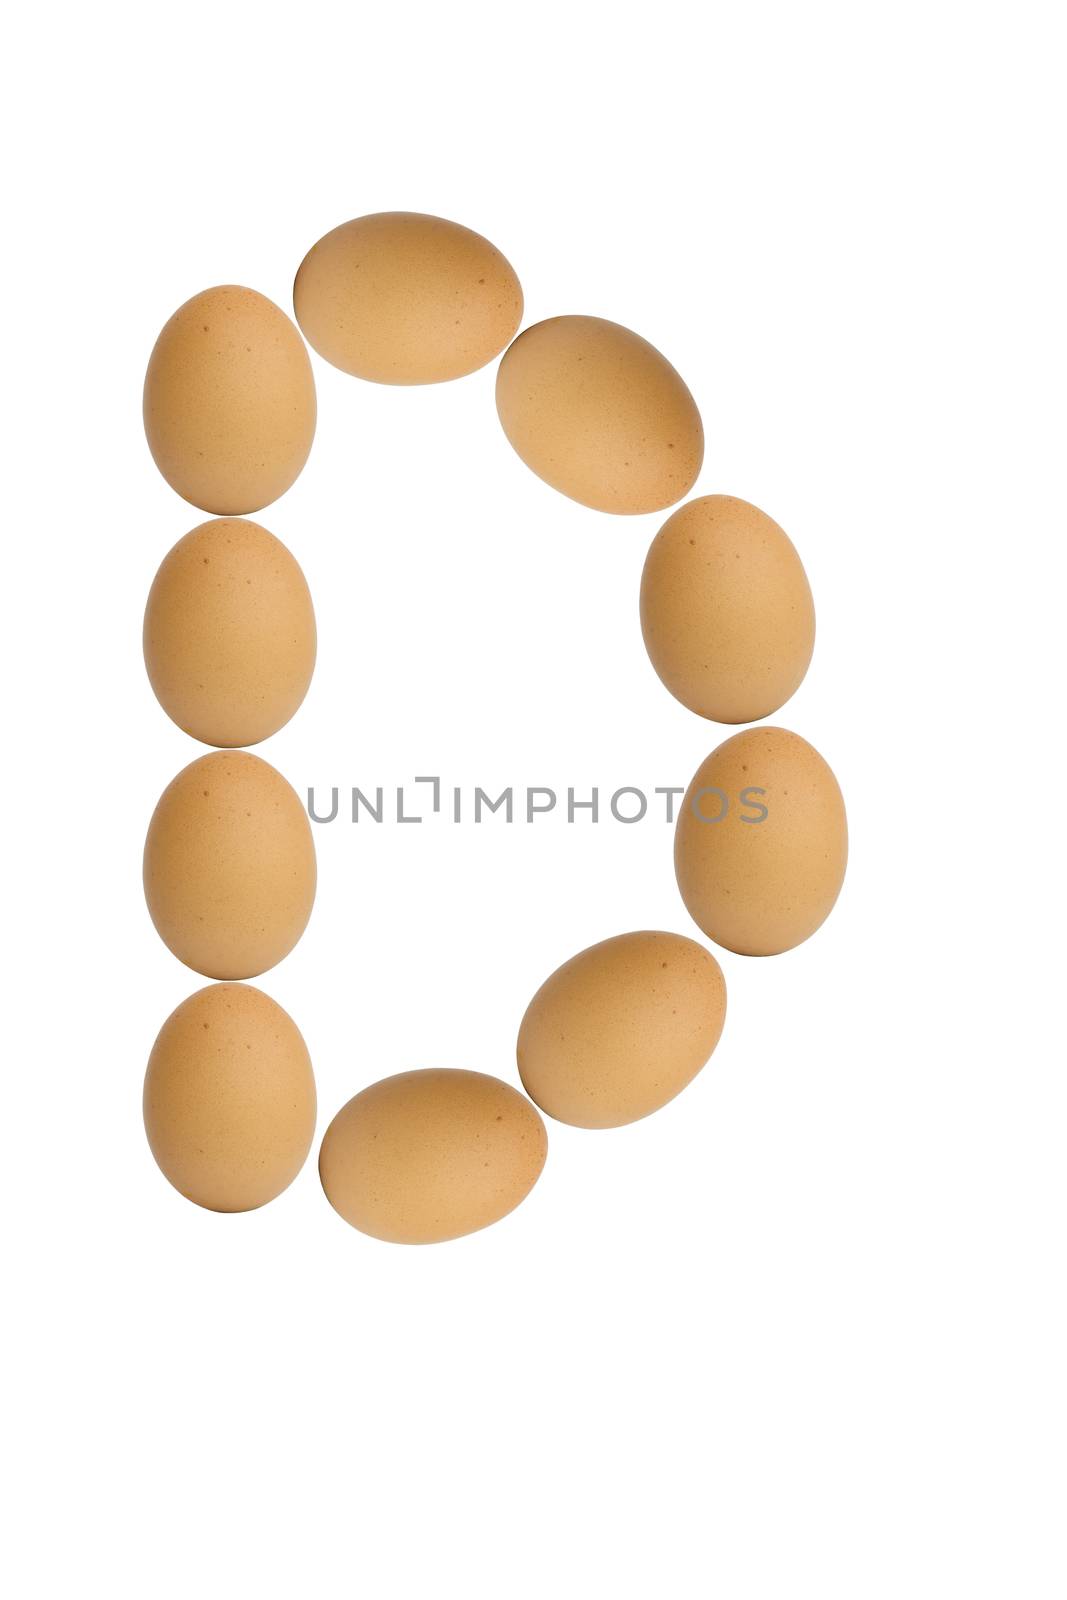 Alphabets  A to Z from brown eggs alphabet isolated on white background, D